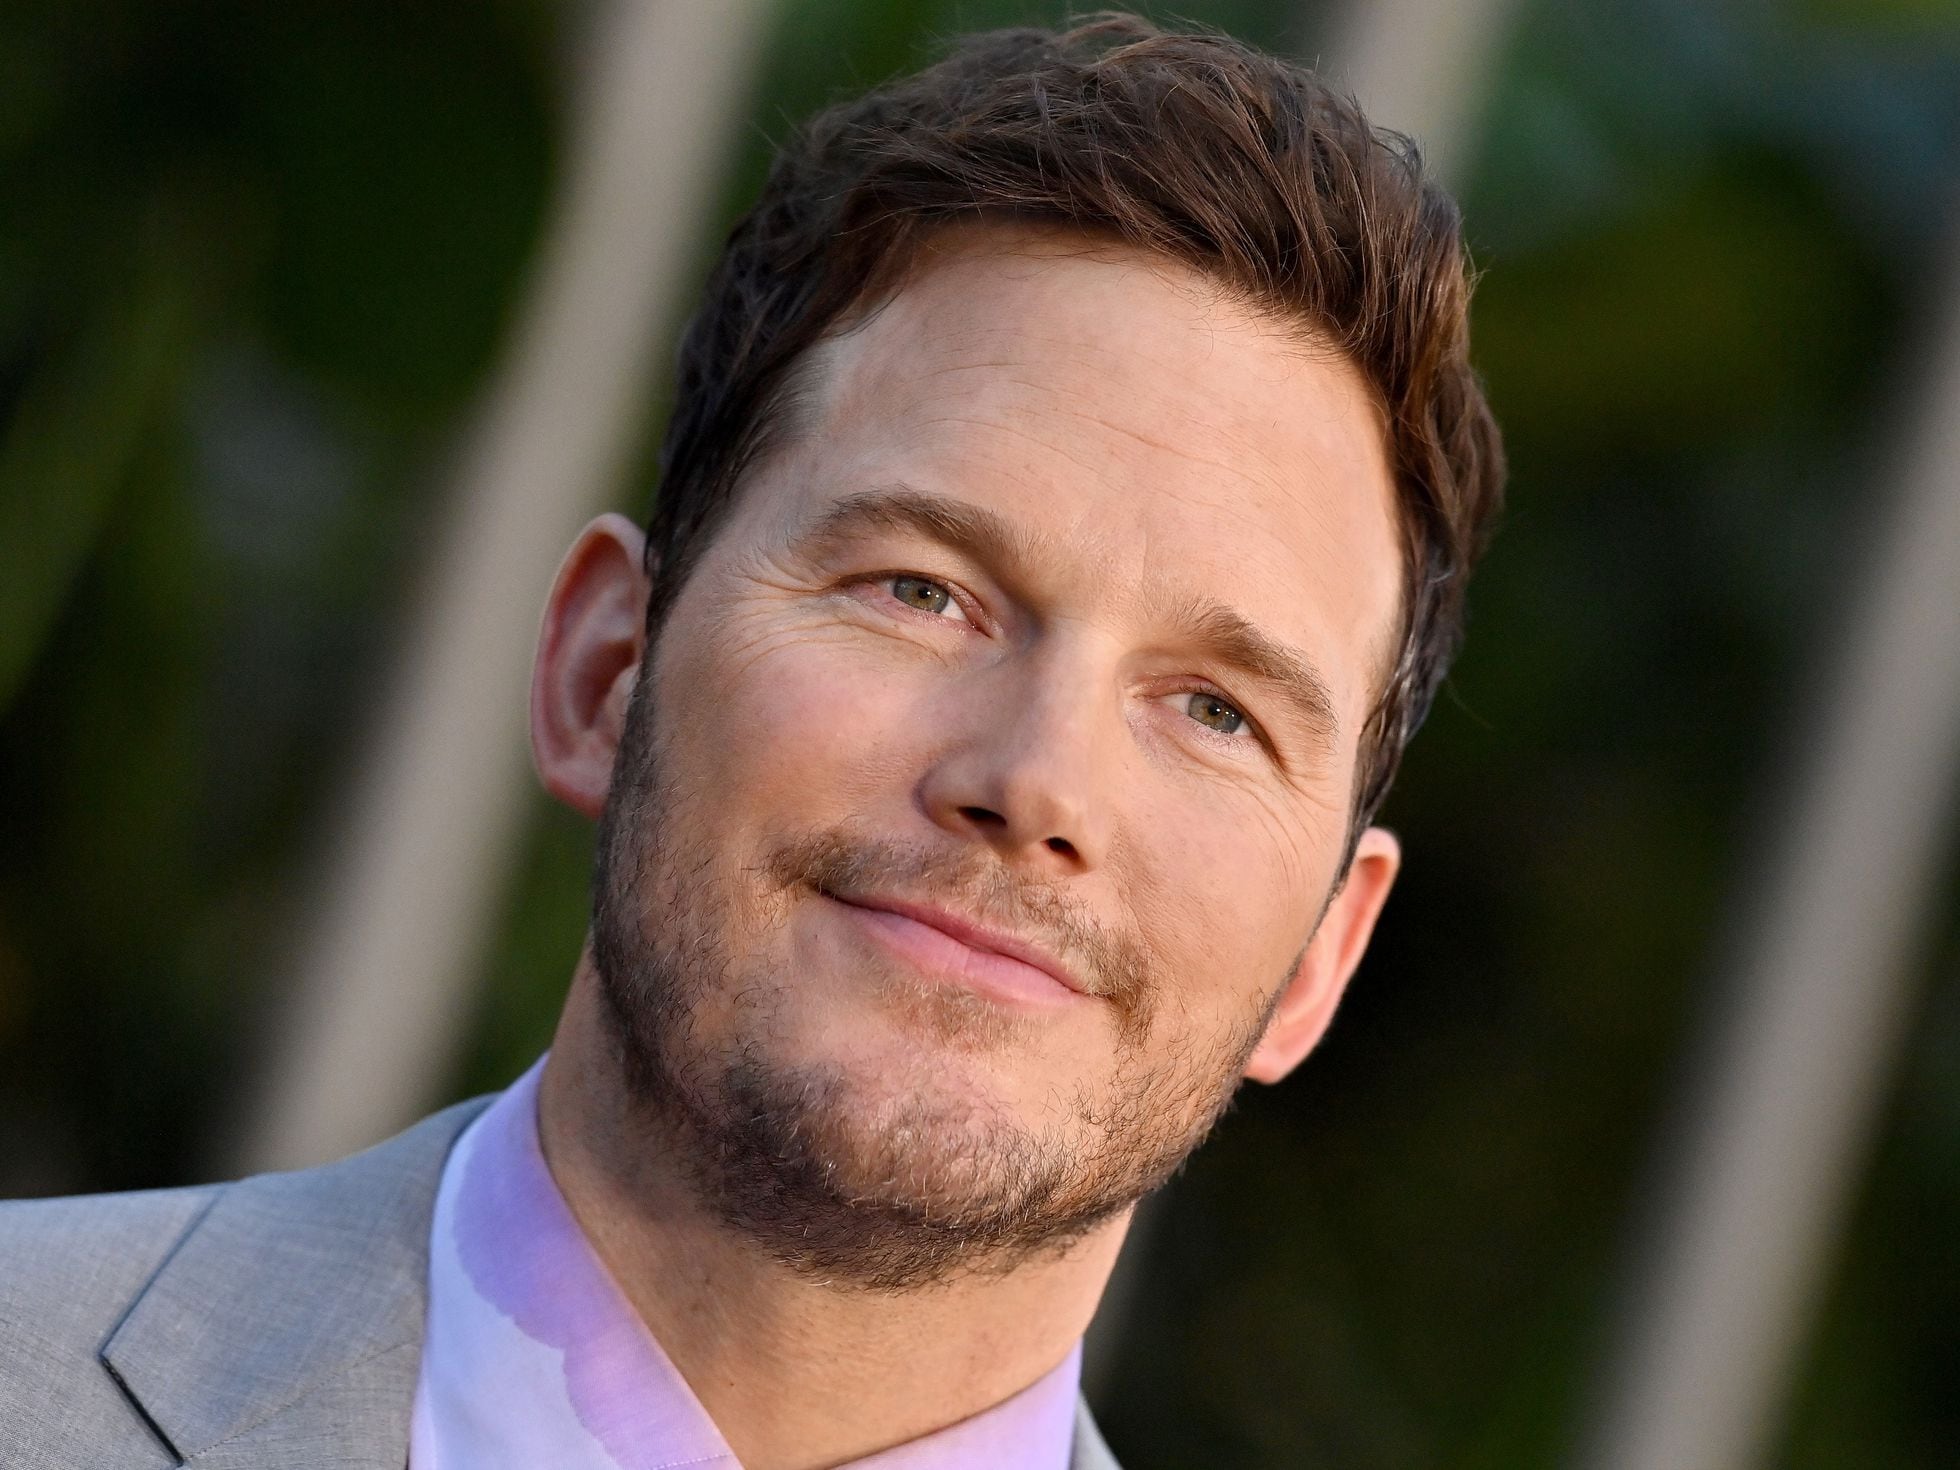 One has to go': How Chris Pratt became the least liked of all of  Hollywood's actors named Chris | Culture | EL PAÃS English